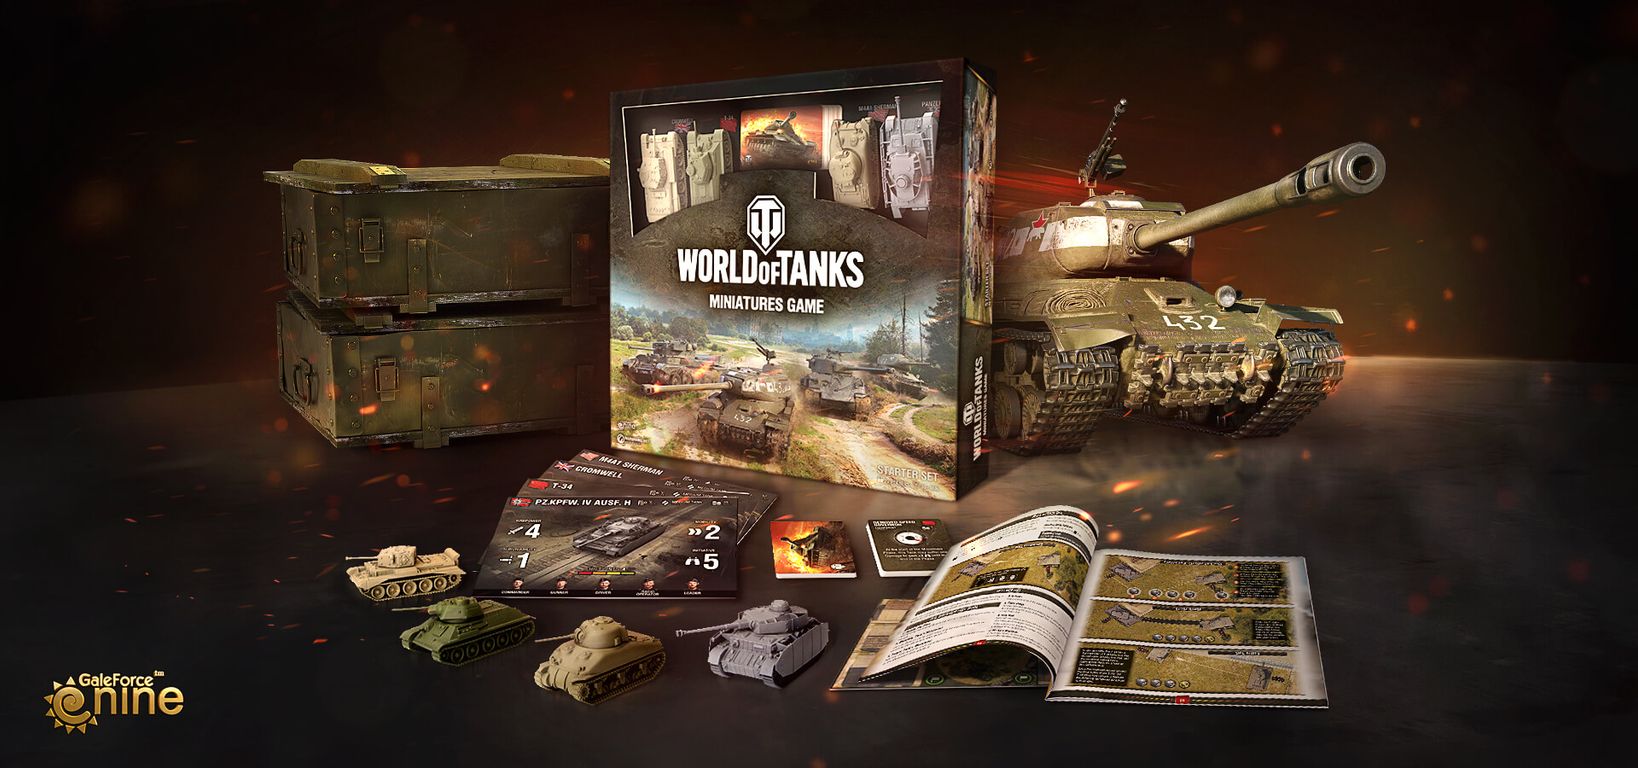 World of Tanks: Miniatures Game components